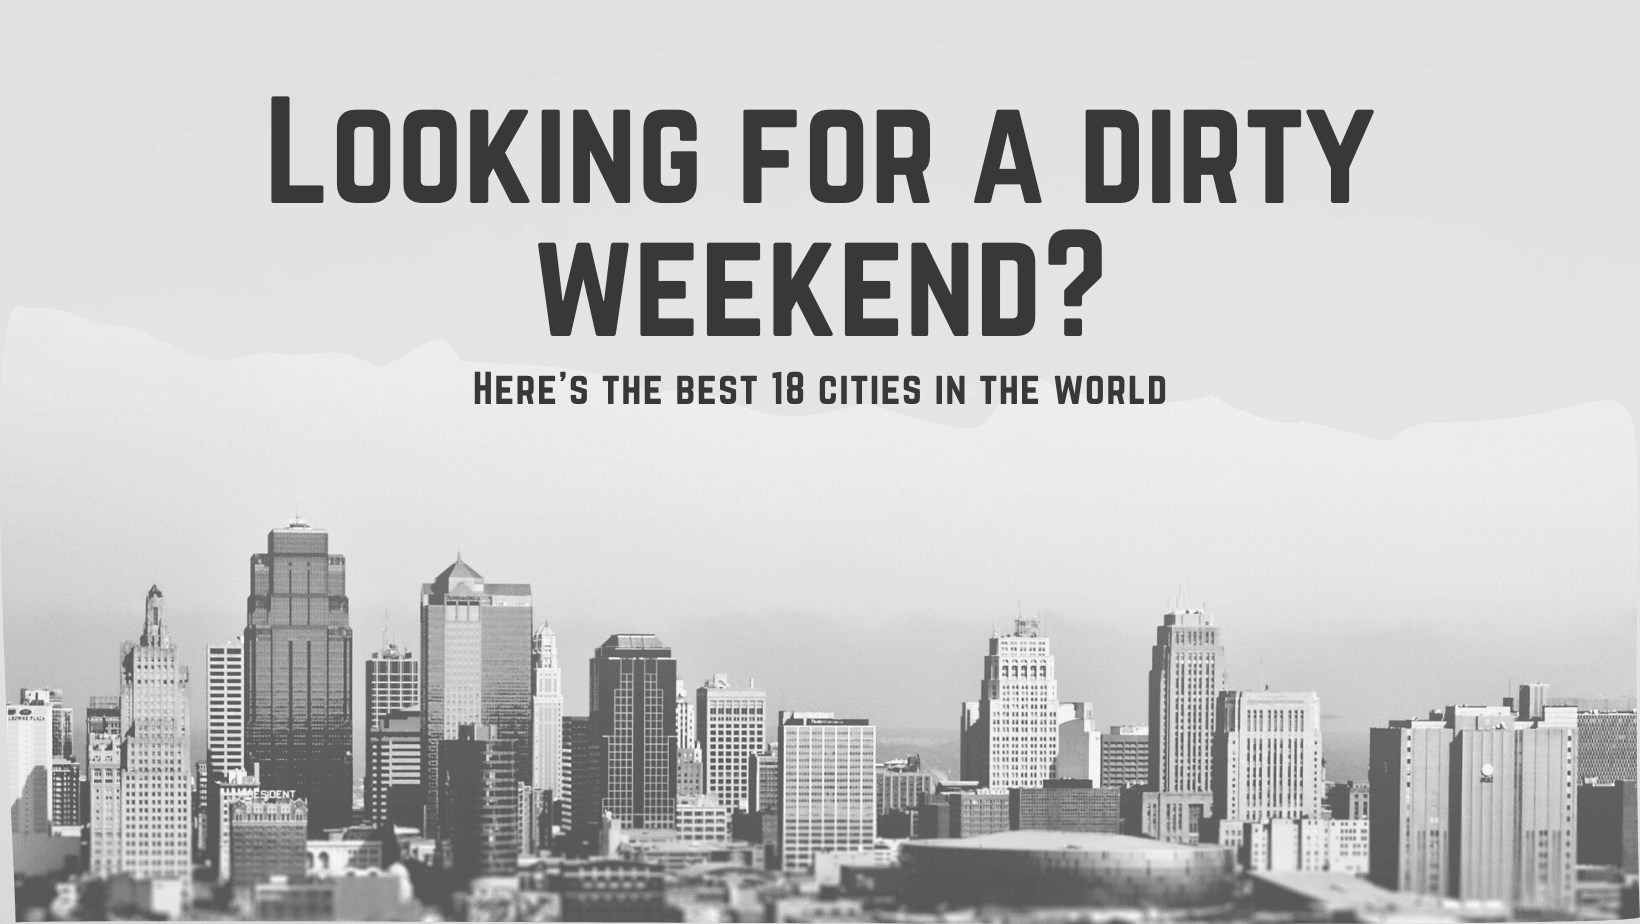 Ranking the Best City for a Dirty Weekend